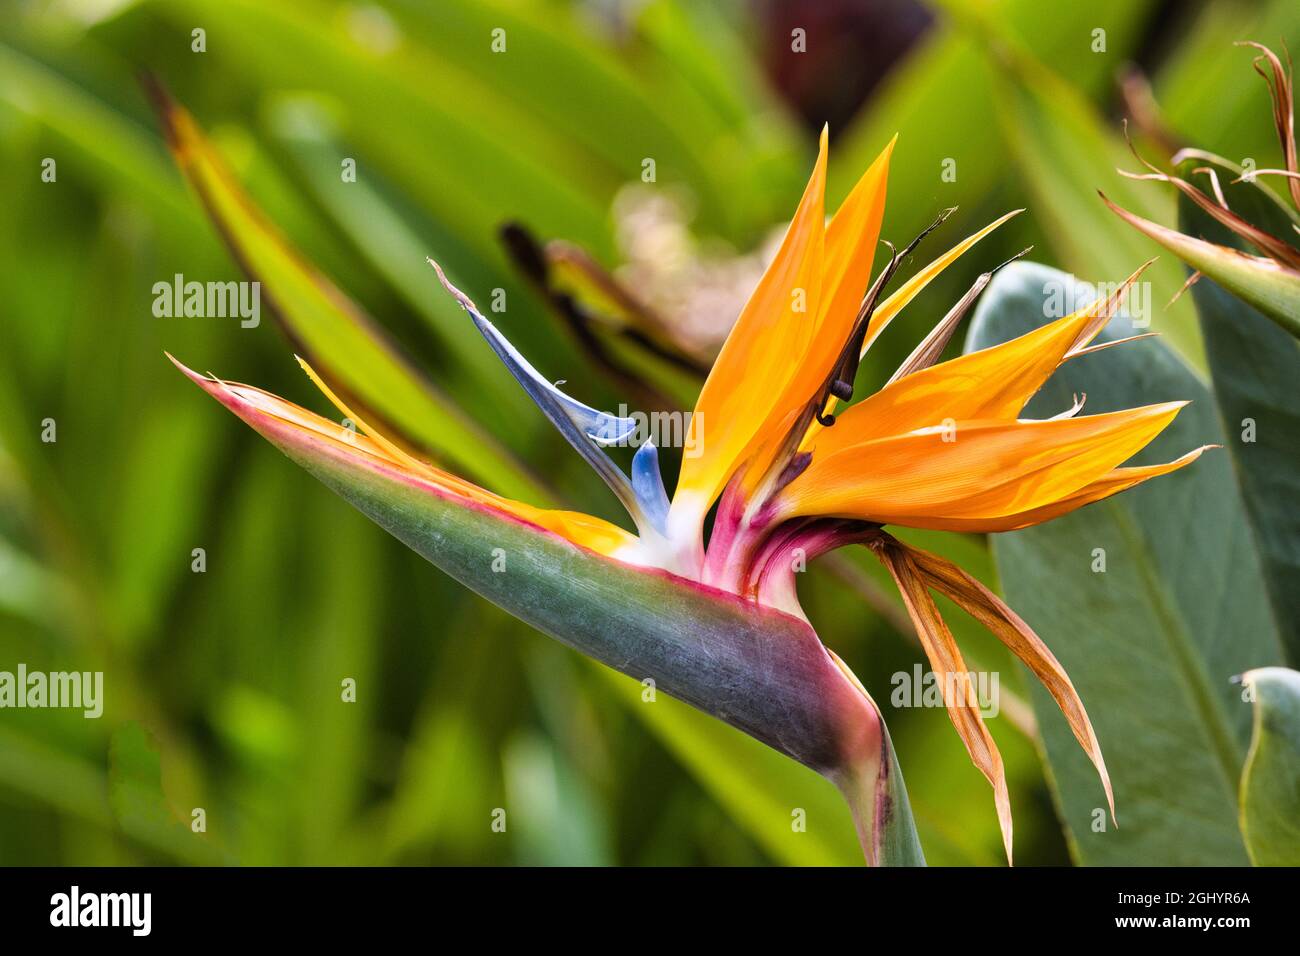 Extremely bright and vivid orange bird of paradise flower in a maui garden Stock Photo